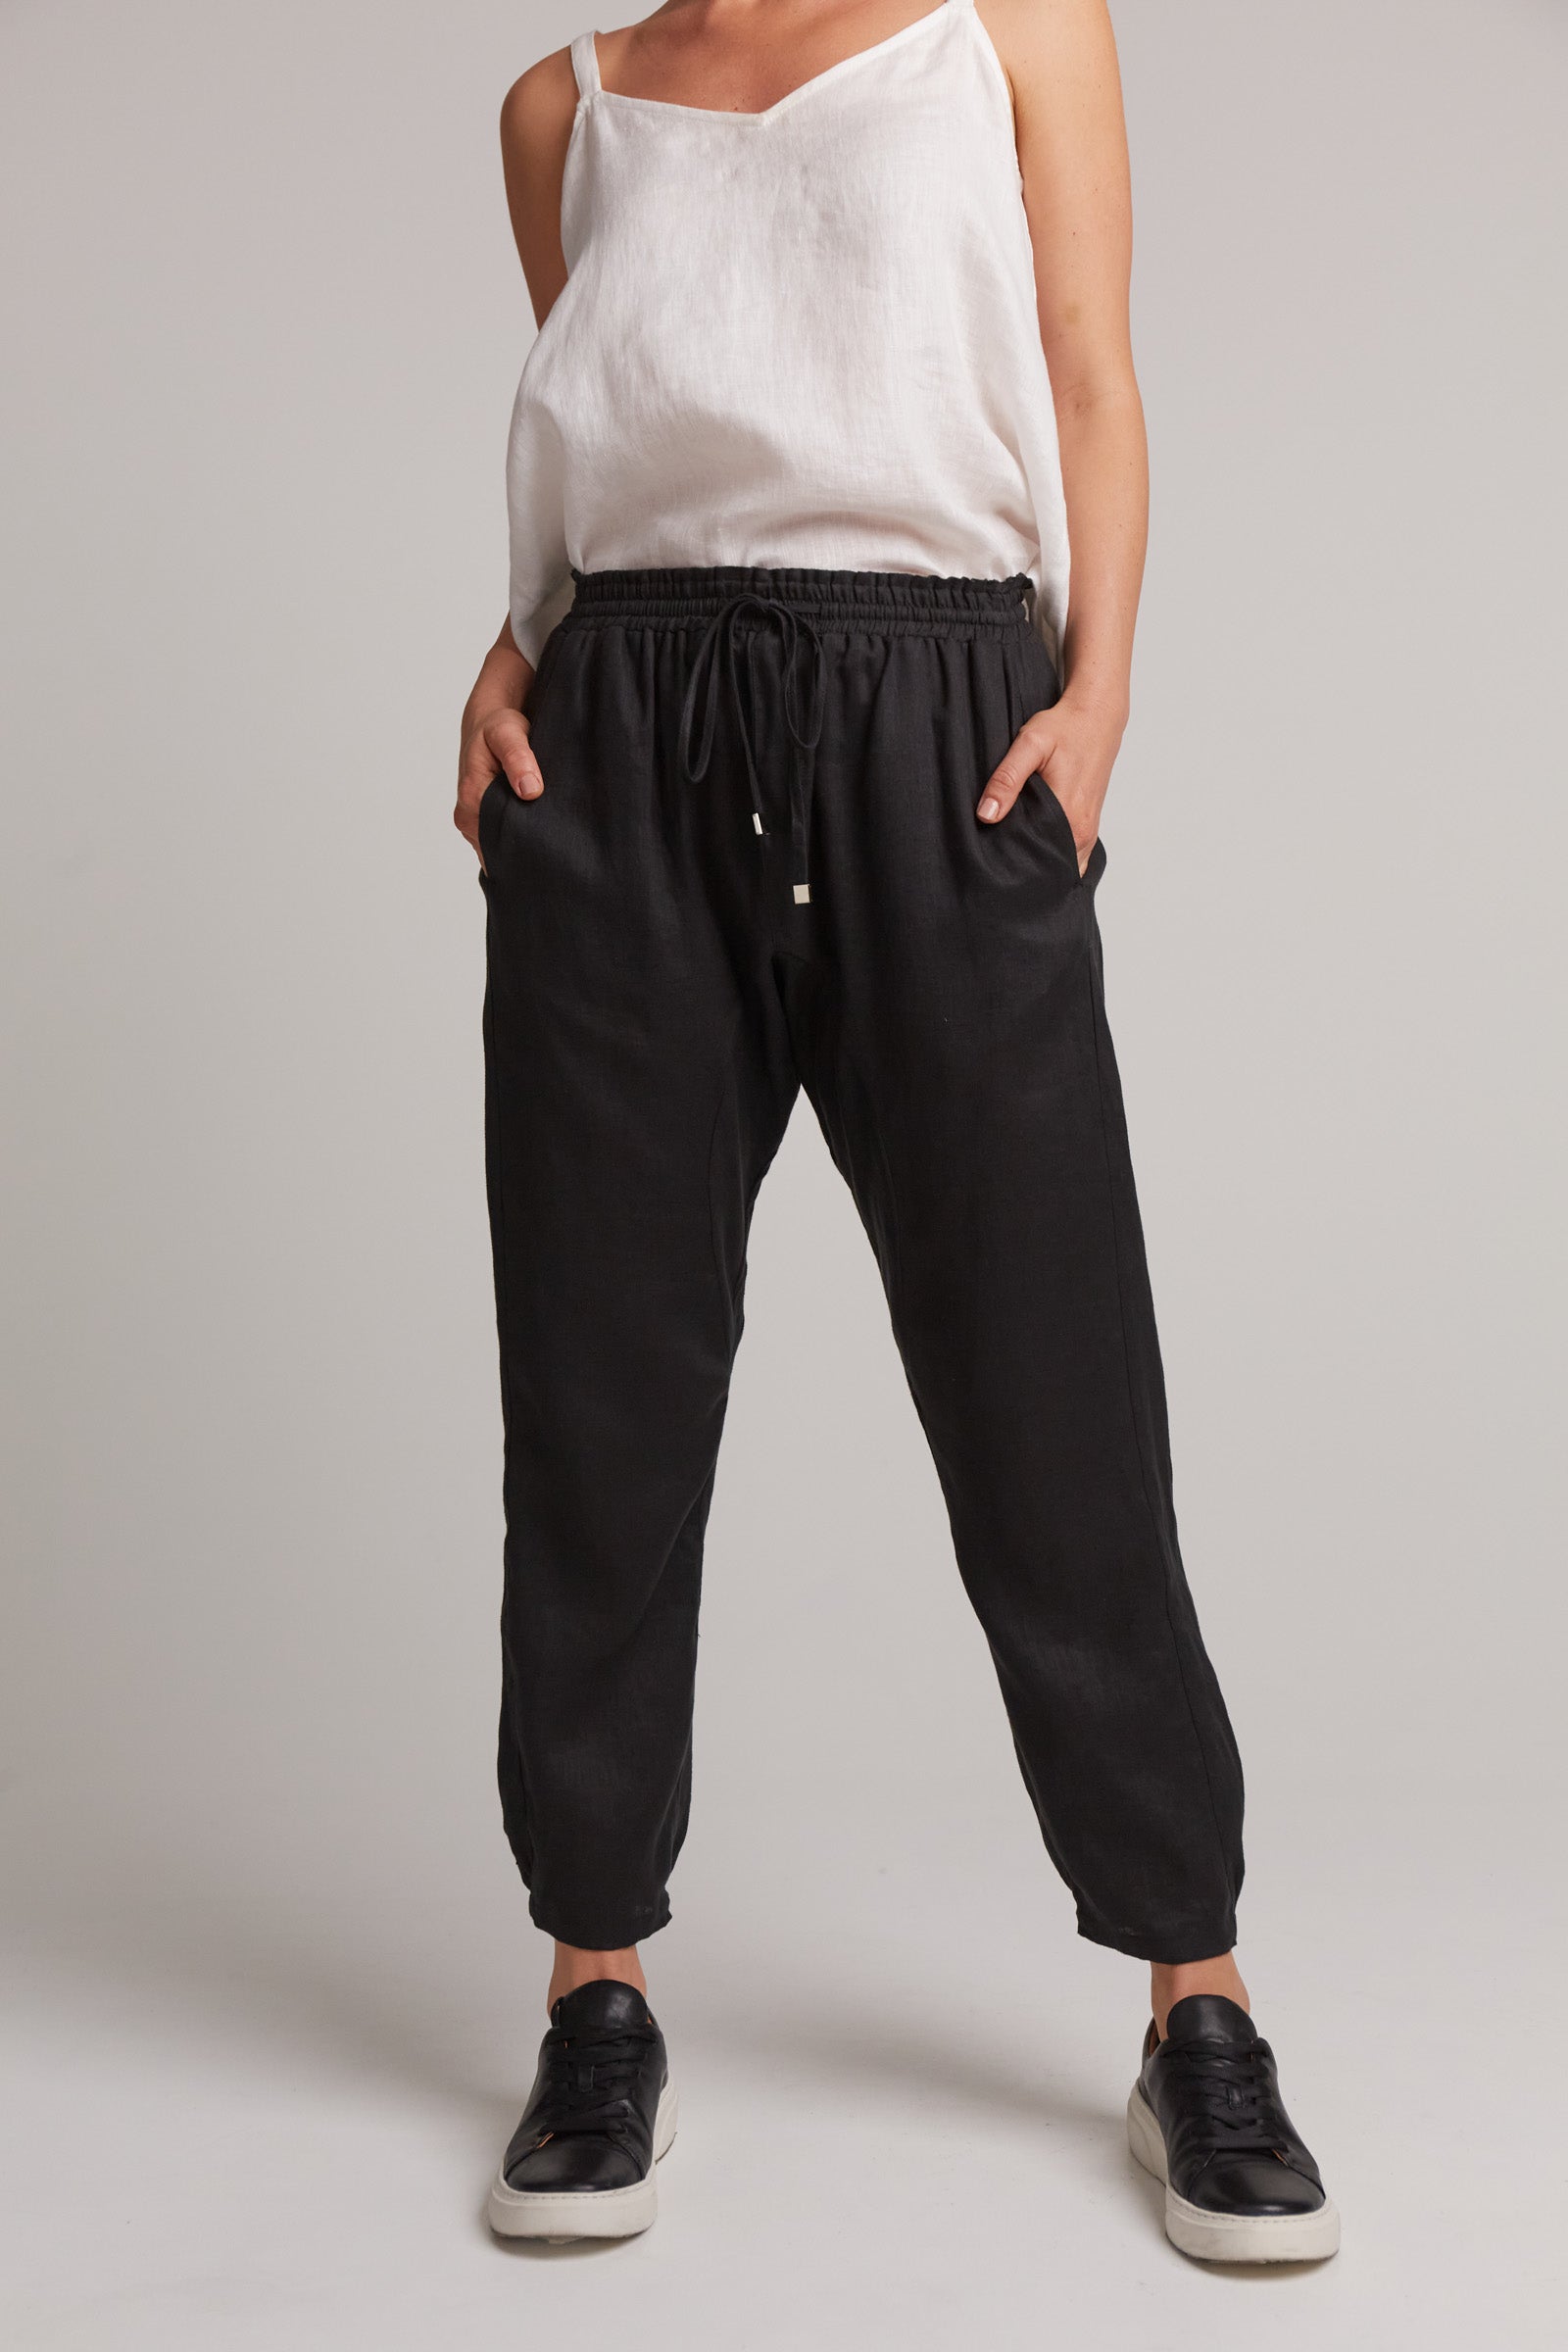 Studio Relaxed Pant - Ebony - eb&ive Clothing - Pant Relaxed Linen